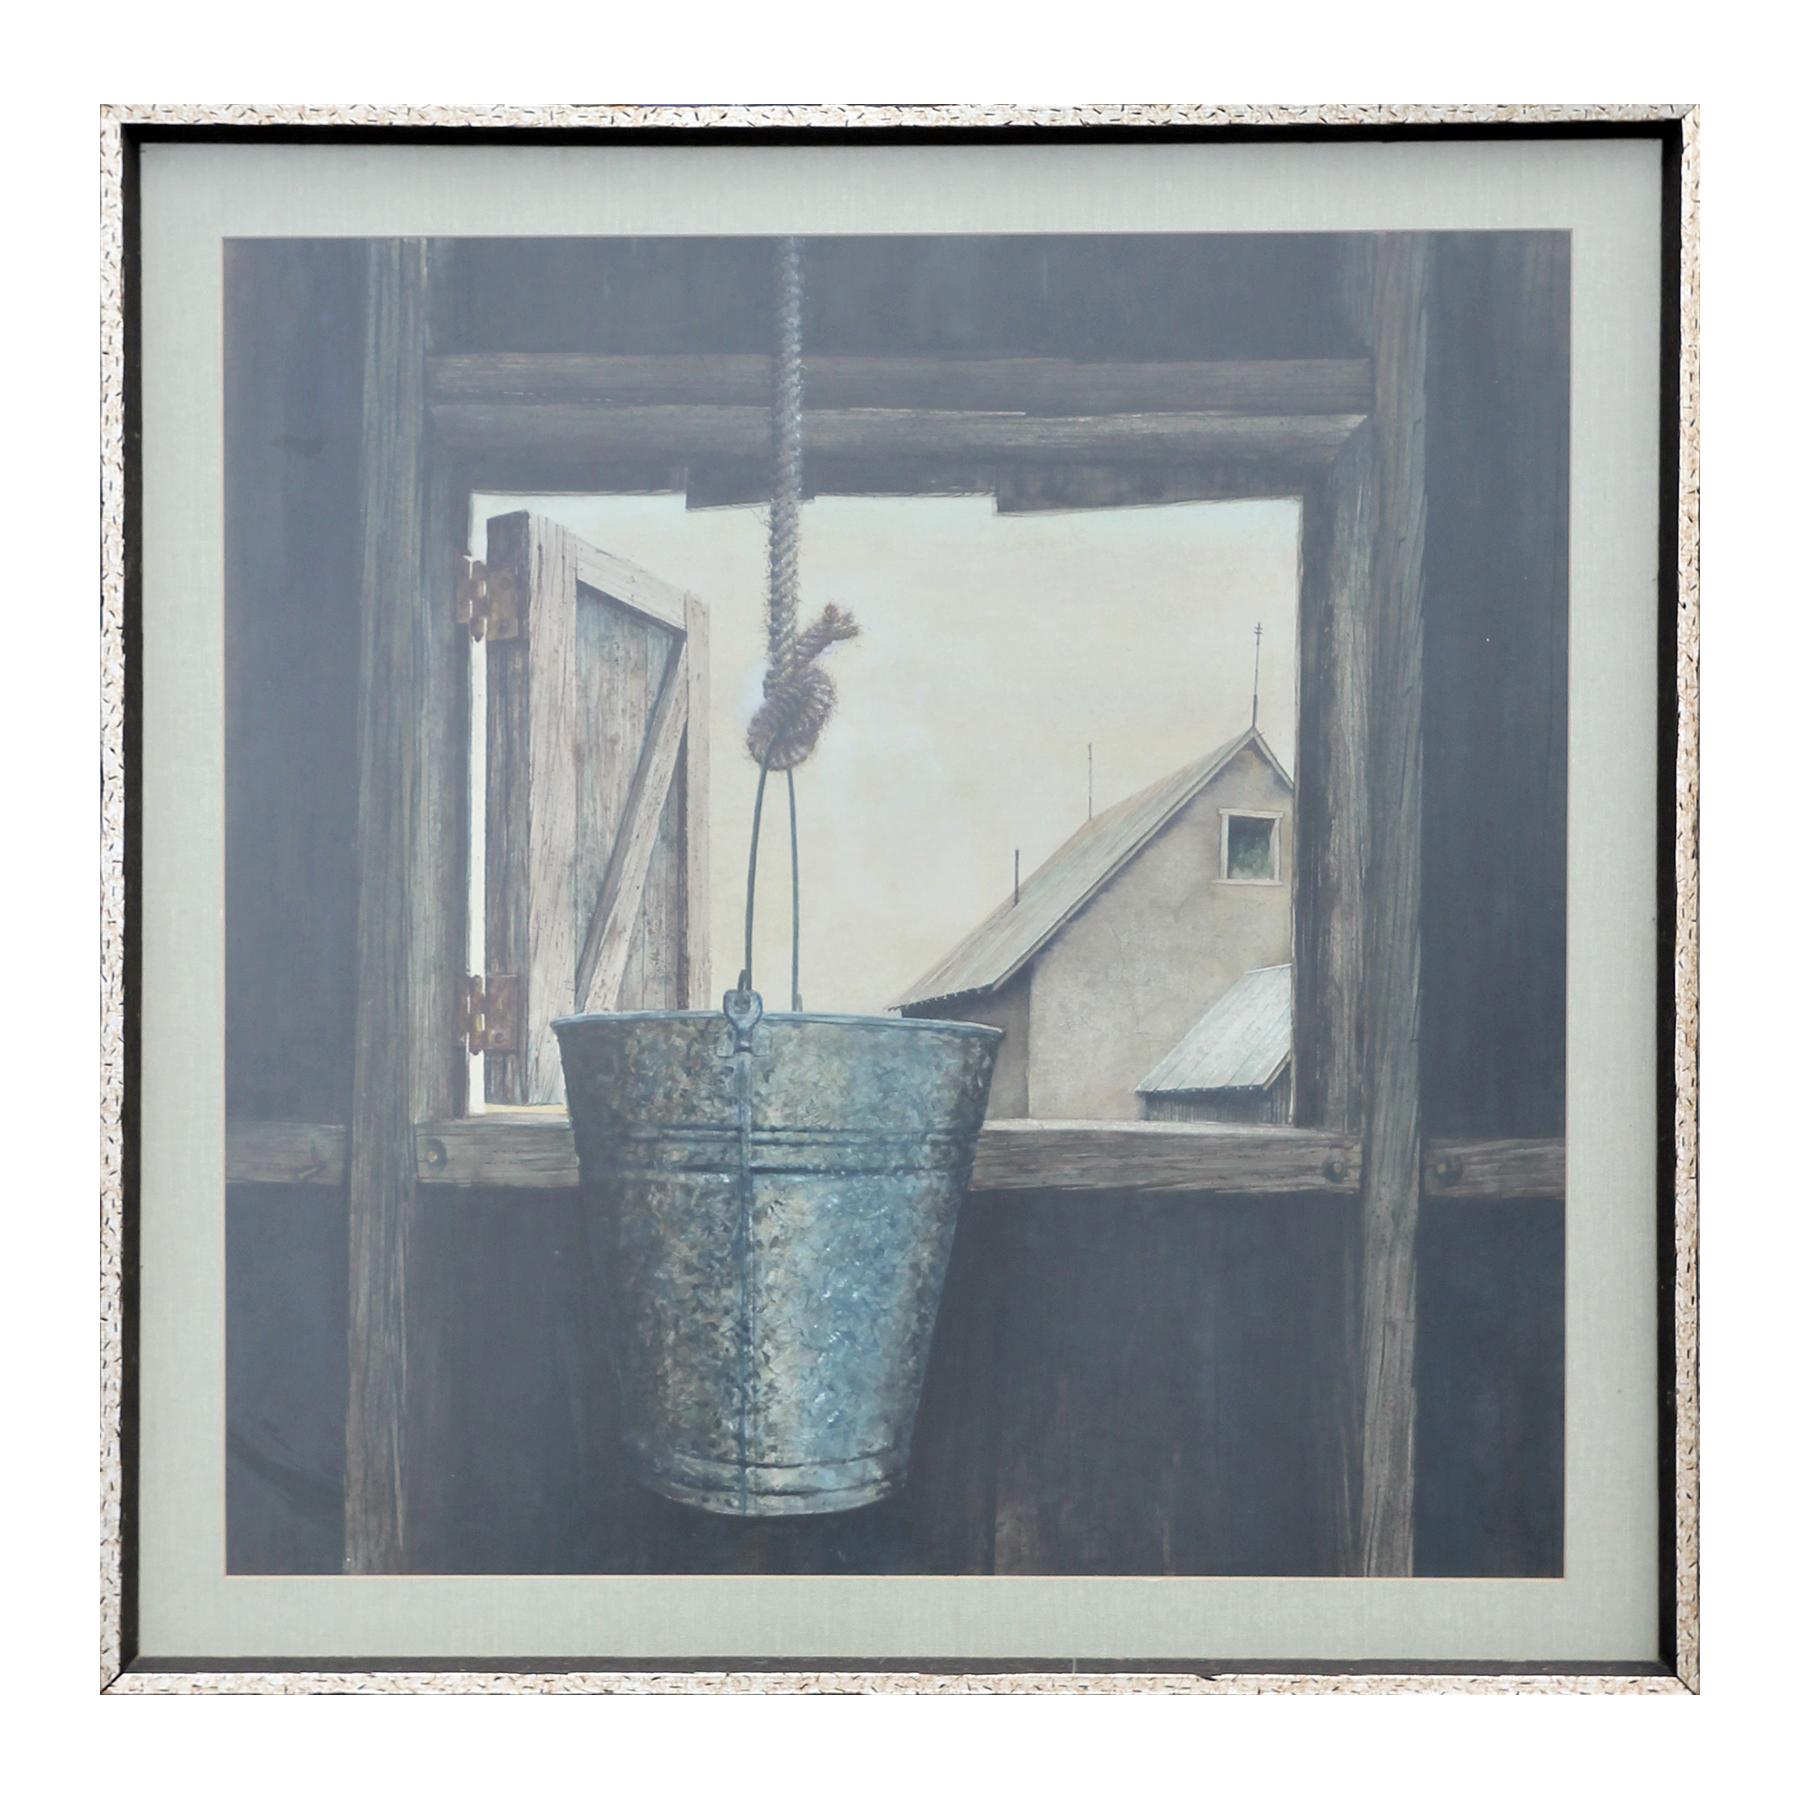 Unknown Still-Life Painting - Rural Gray Toned Naturalistic Bucket in Window Still Life Farm Painting